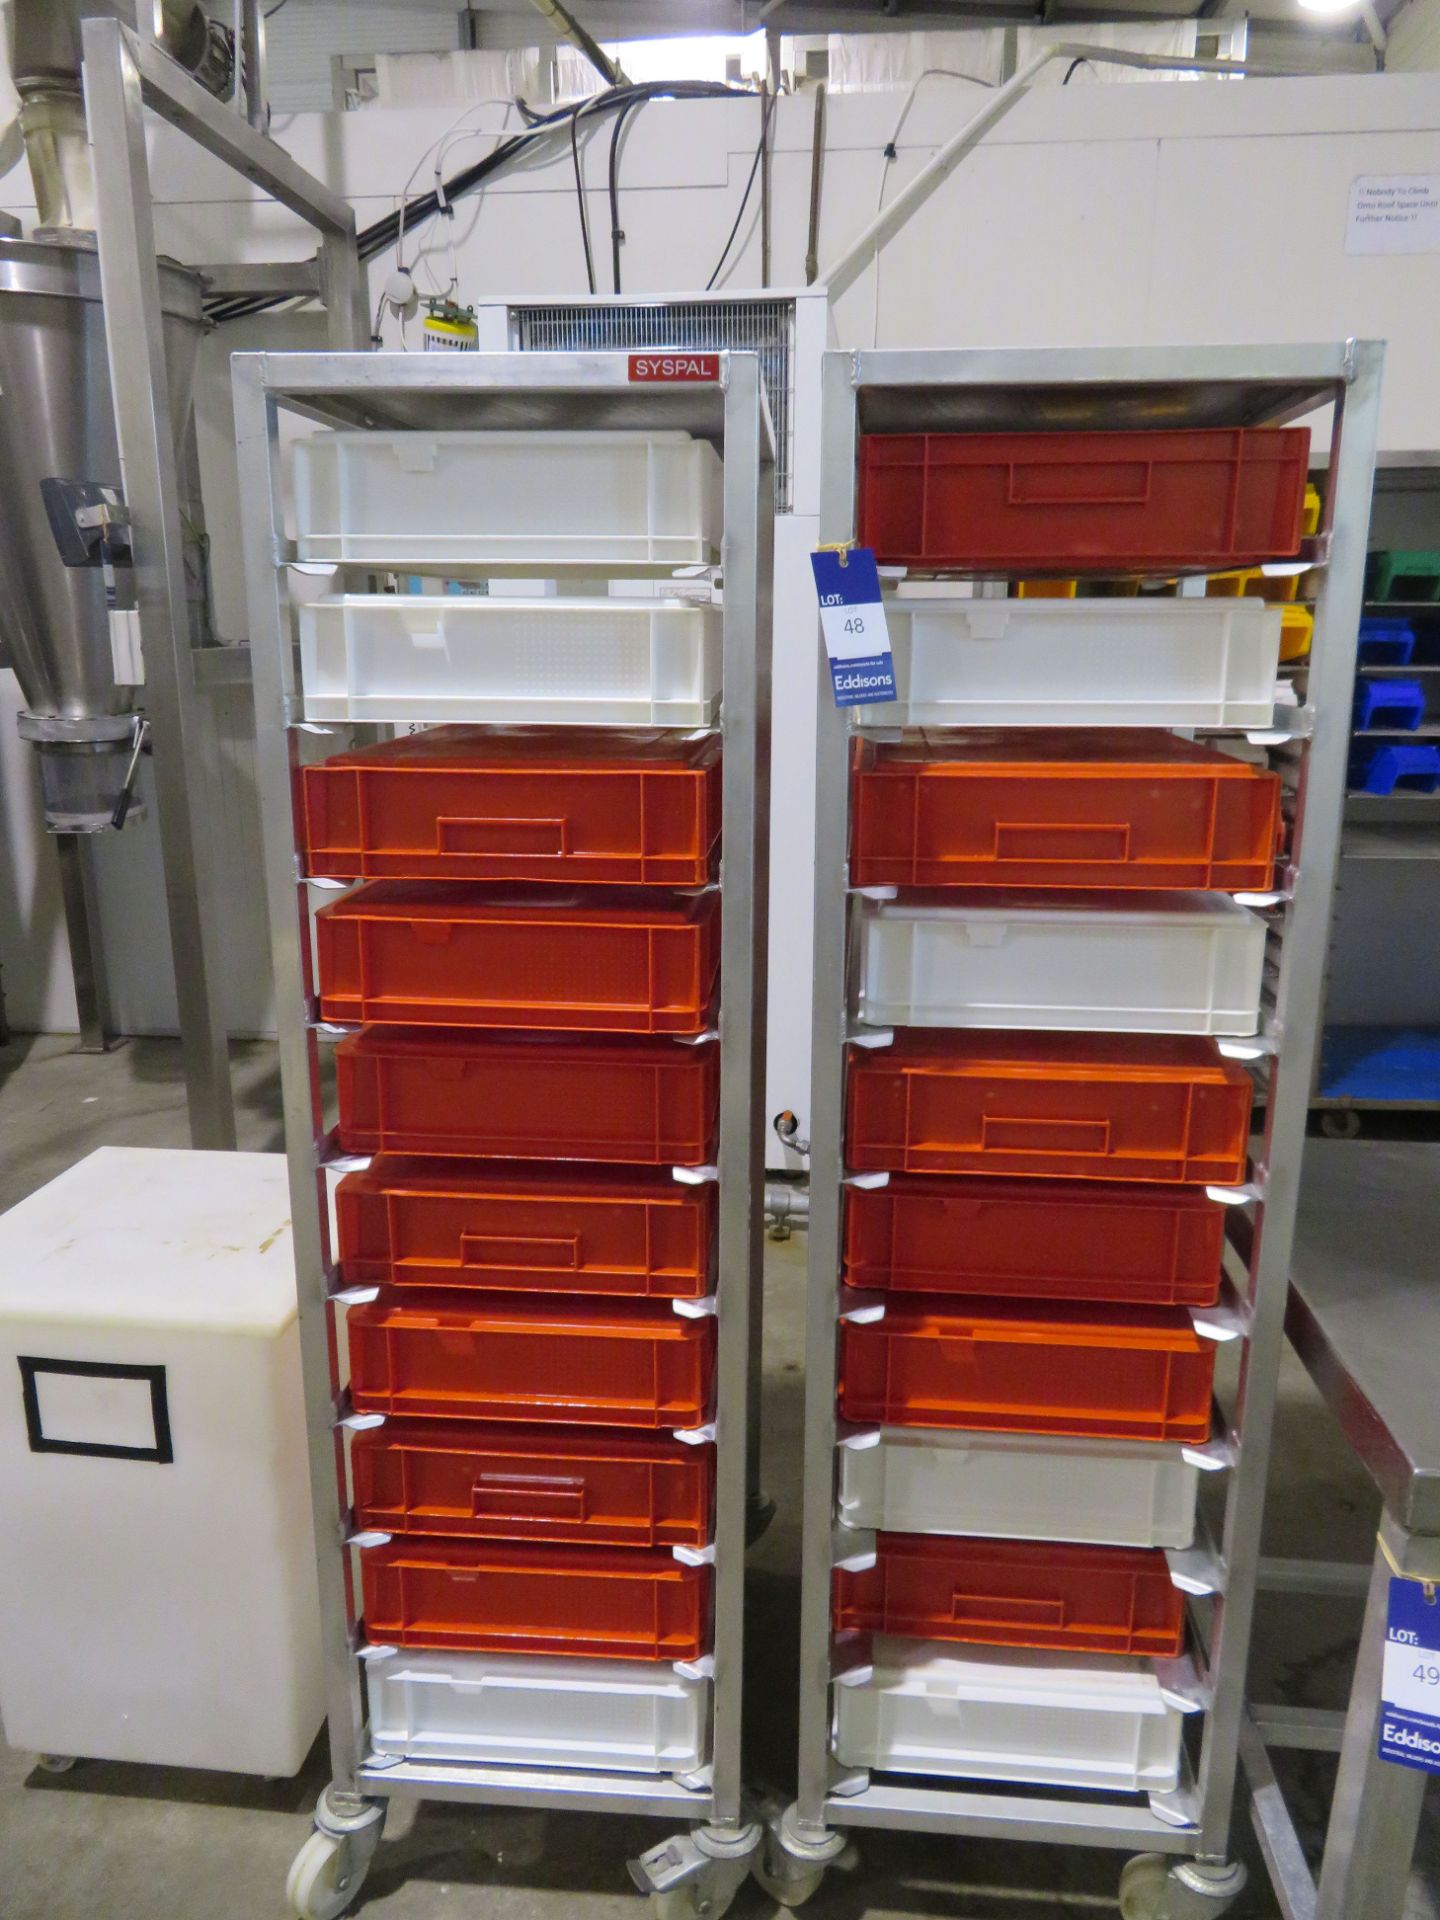 2x Syspal Aluminium Trolleys 480 x 630 x 1720mm with plastic trays and 5x flour bins - Image 2 of 2